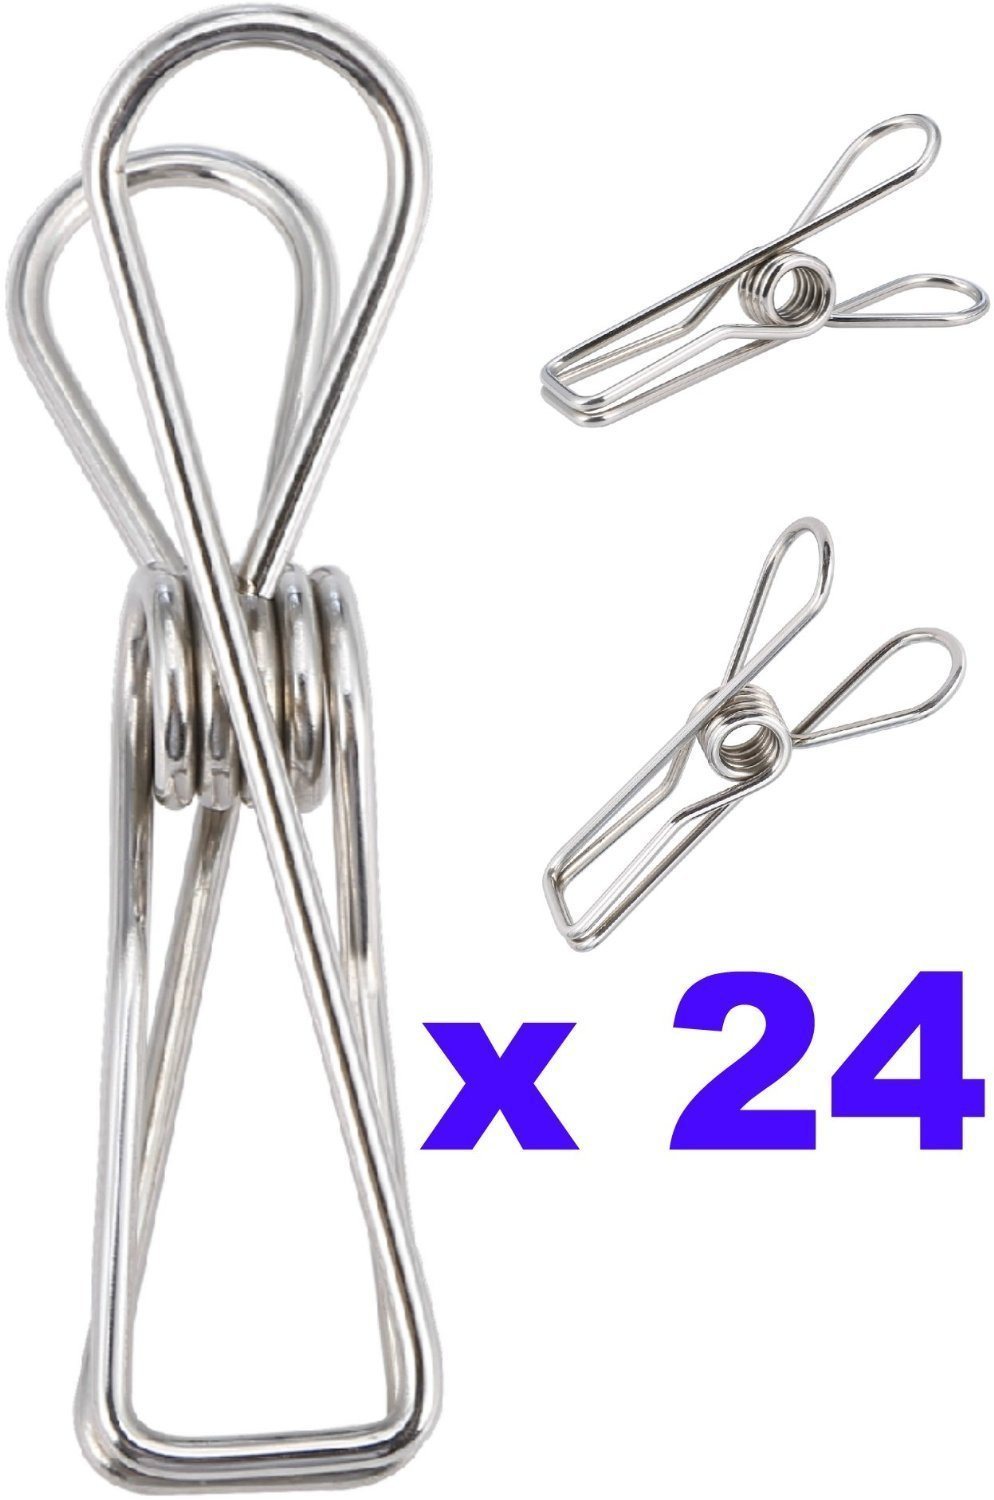 Laundry Clothes Pins - Clothesline Clips - Travel Clothes Line Stainless Steel Wire Metal Laundry Clip - Set Of 24 Indoor Outdoor Hanger Clamps - Chip Bag Clips - Office Binder by Pro Chef Kitchen Tools